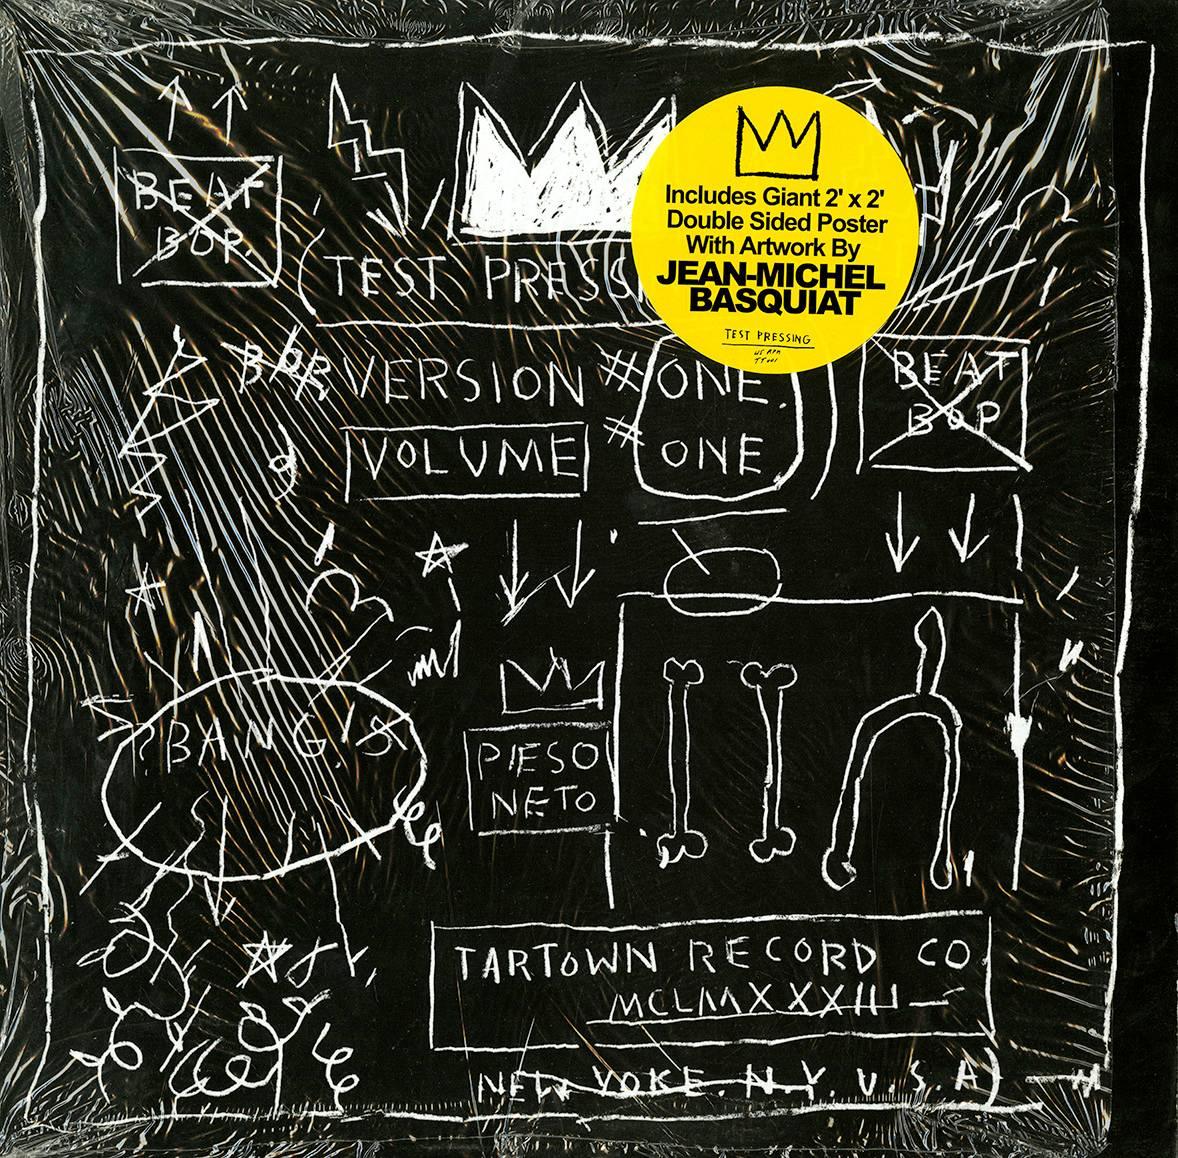 Basquiat Beat Bop record art and poster  - Print by after Jean-Michel Basquiat